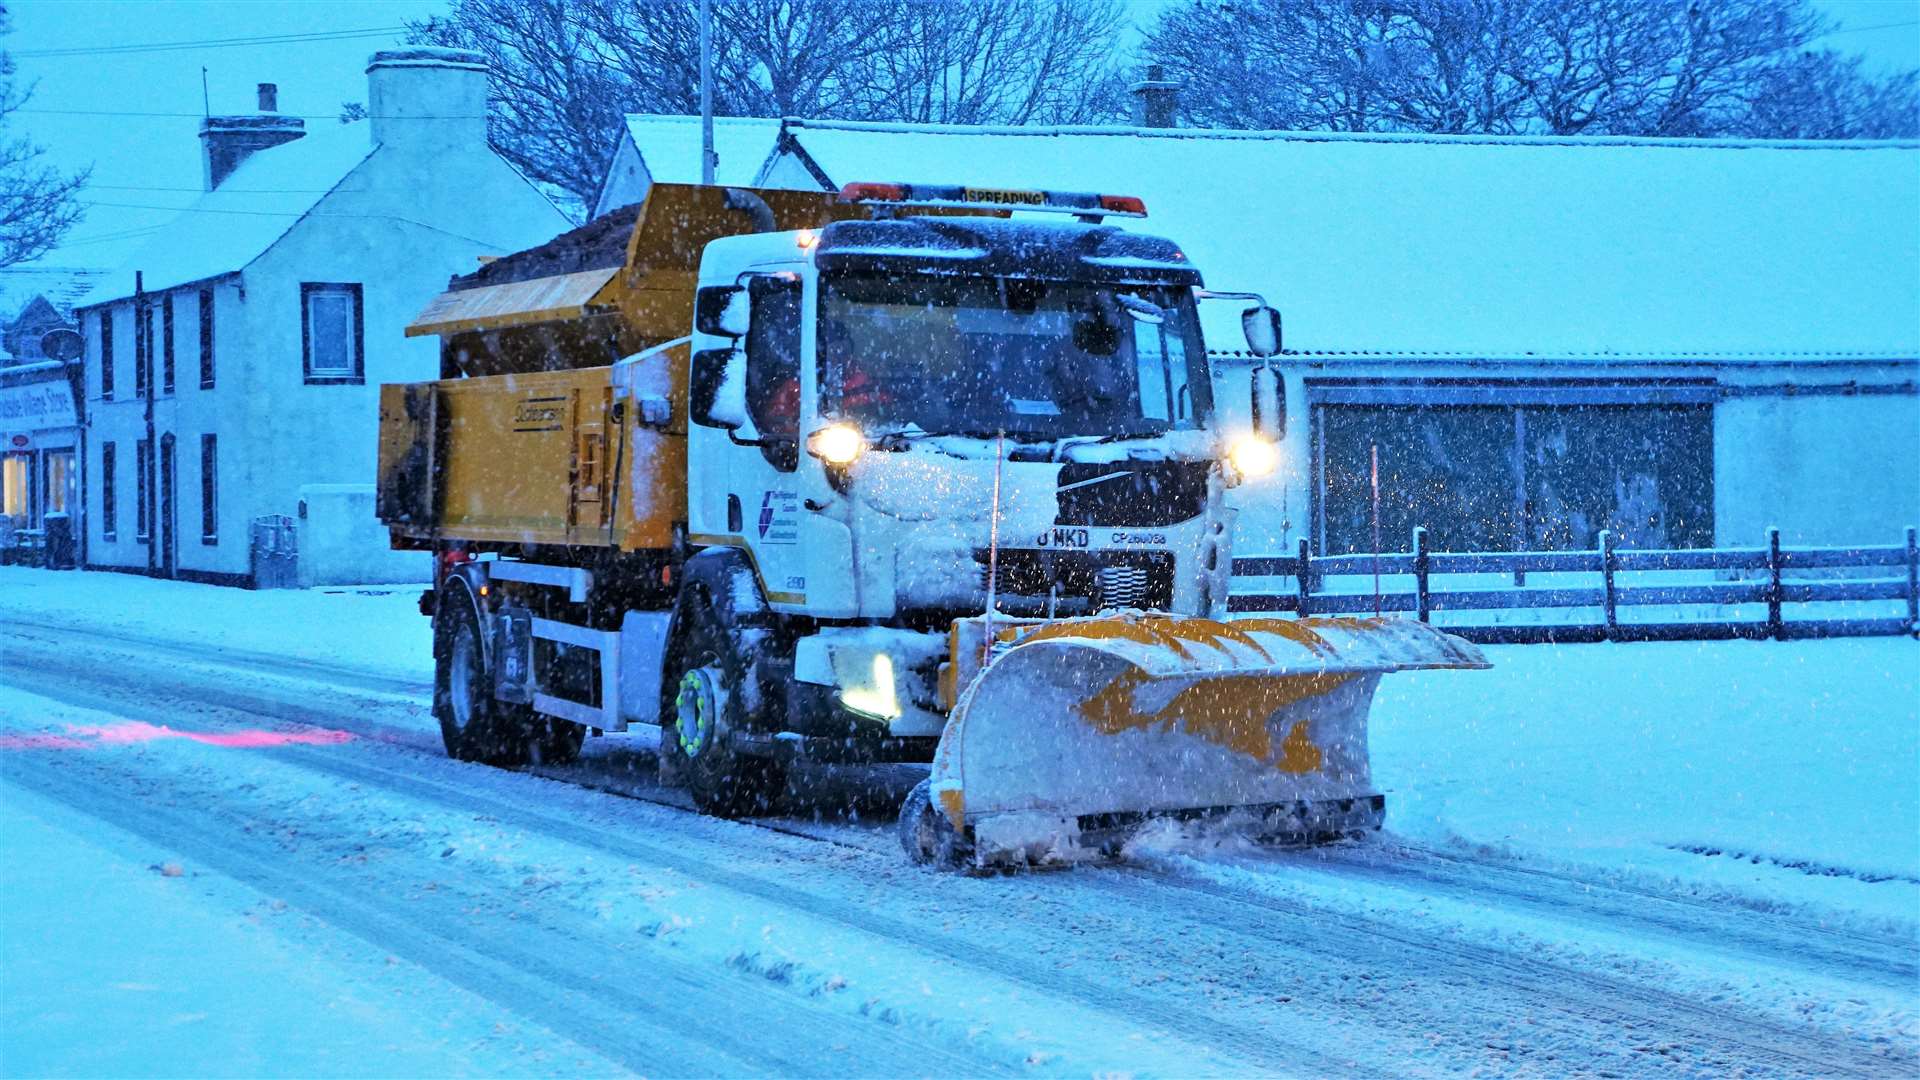 A council snow plough in action.